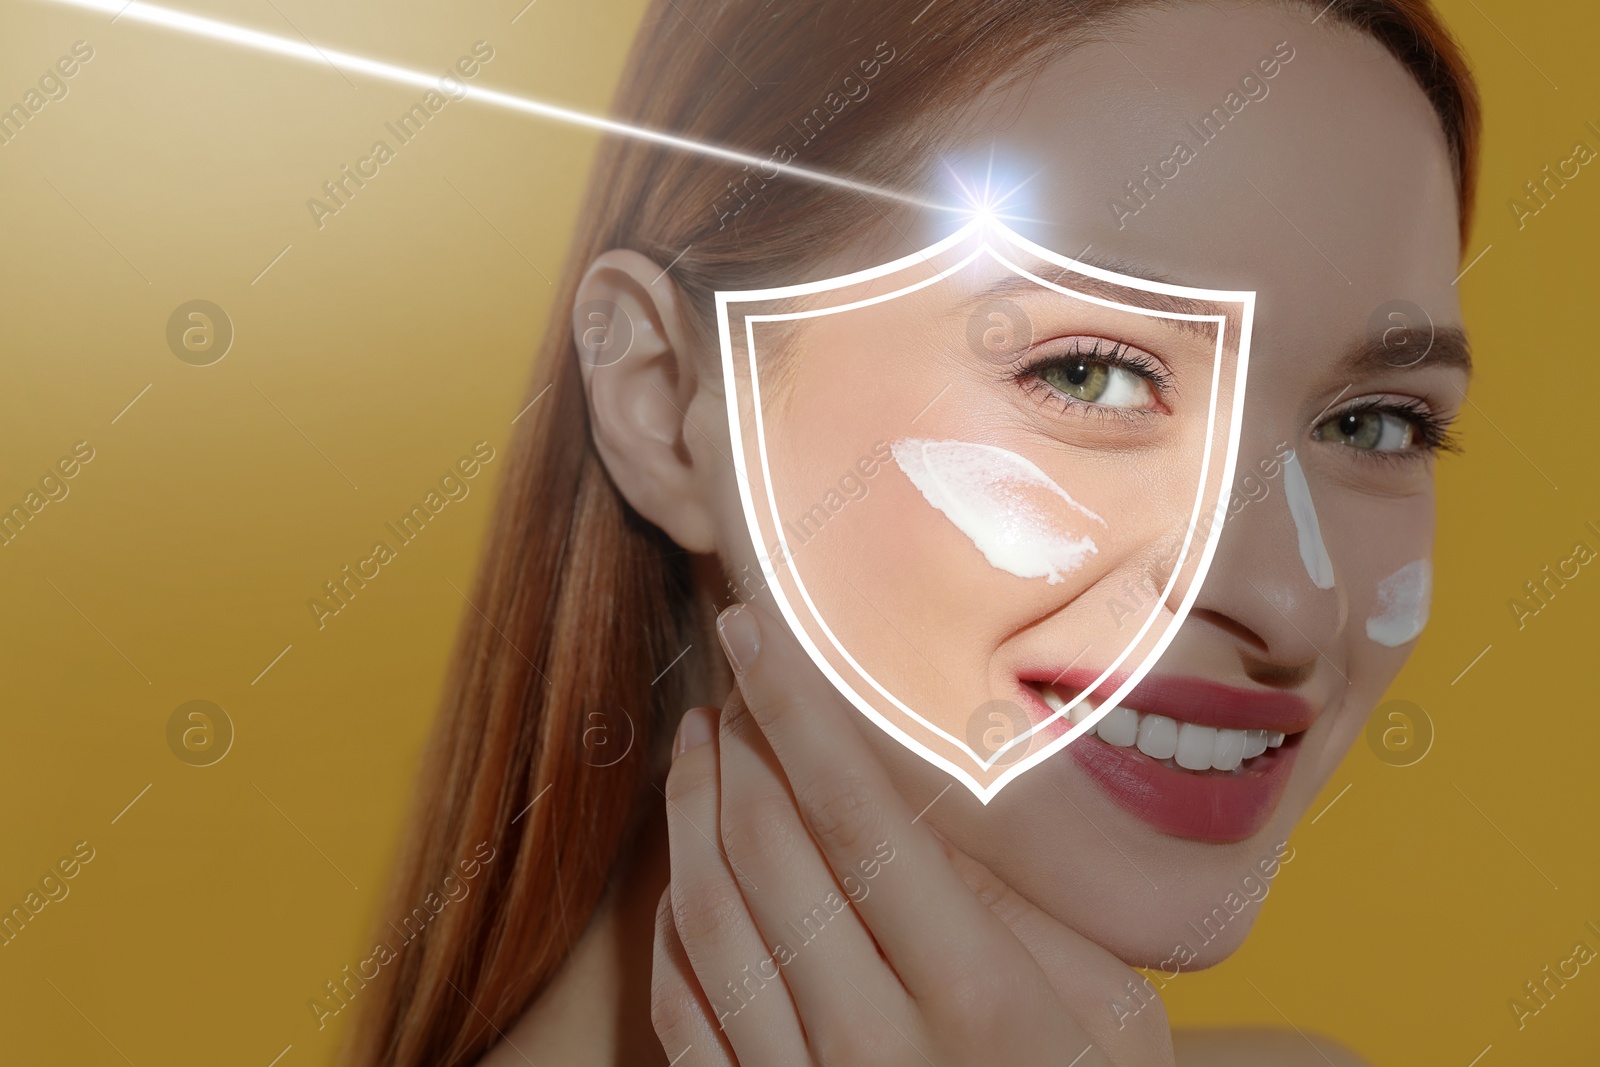 Image of Sun protection care. Beautiful woman with sunscreen on face against golden background. Illustration of shield as SPF